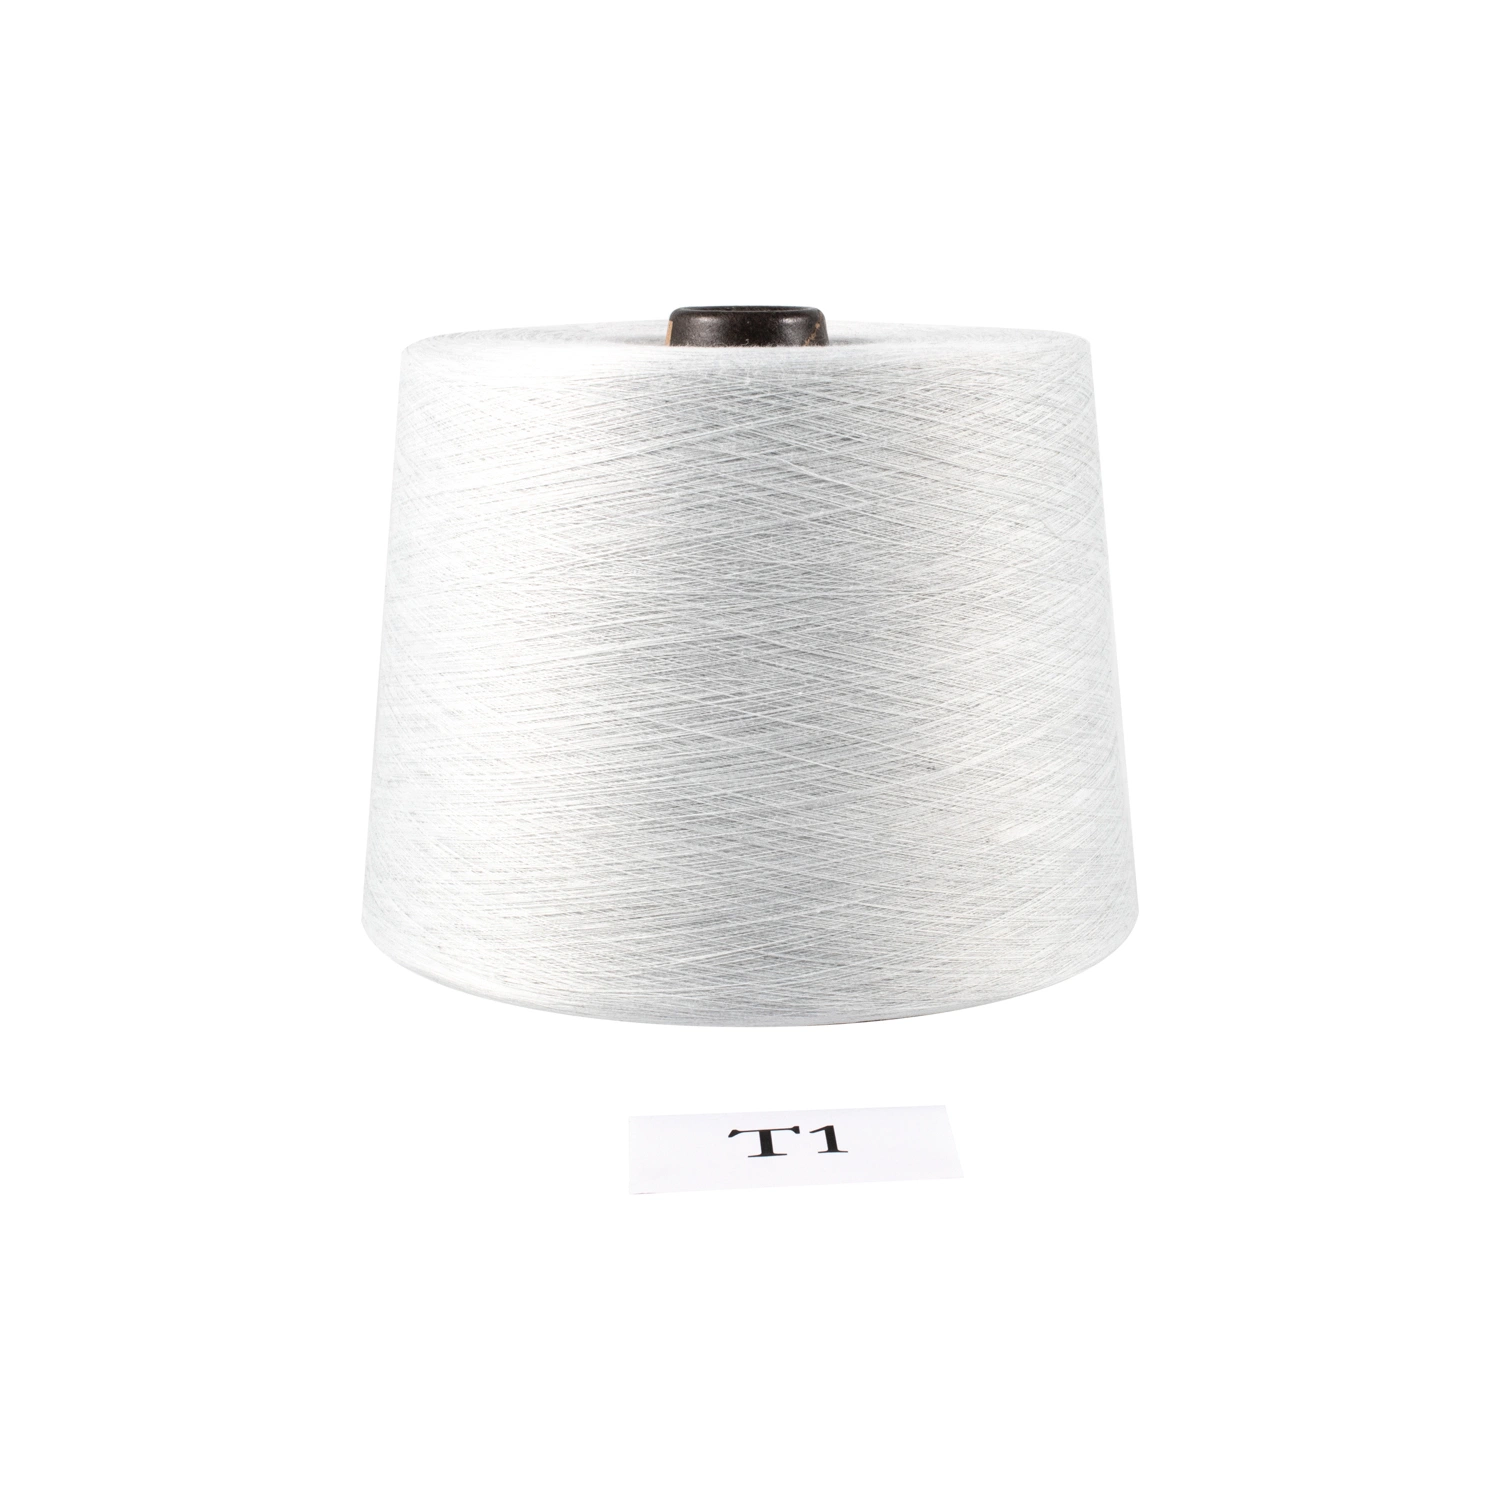 Xk White 100% Polyester Yarn for Sewing Thread with Fiber